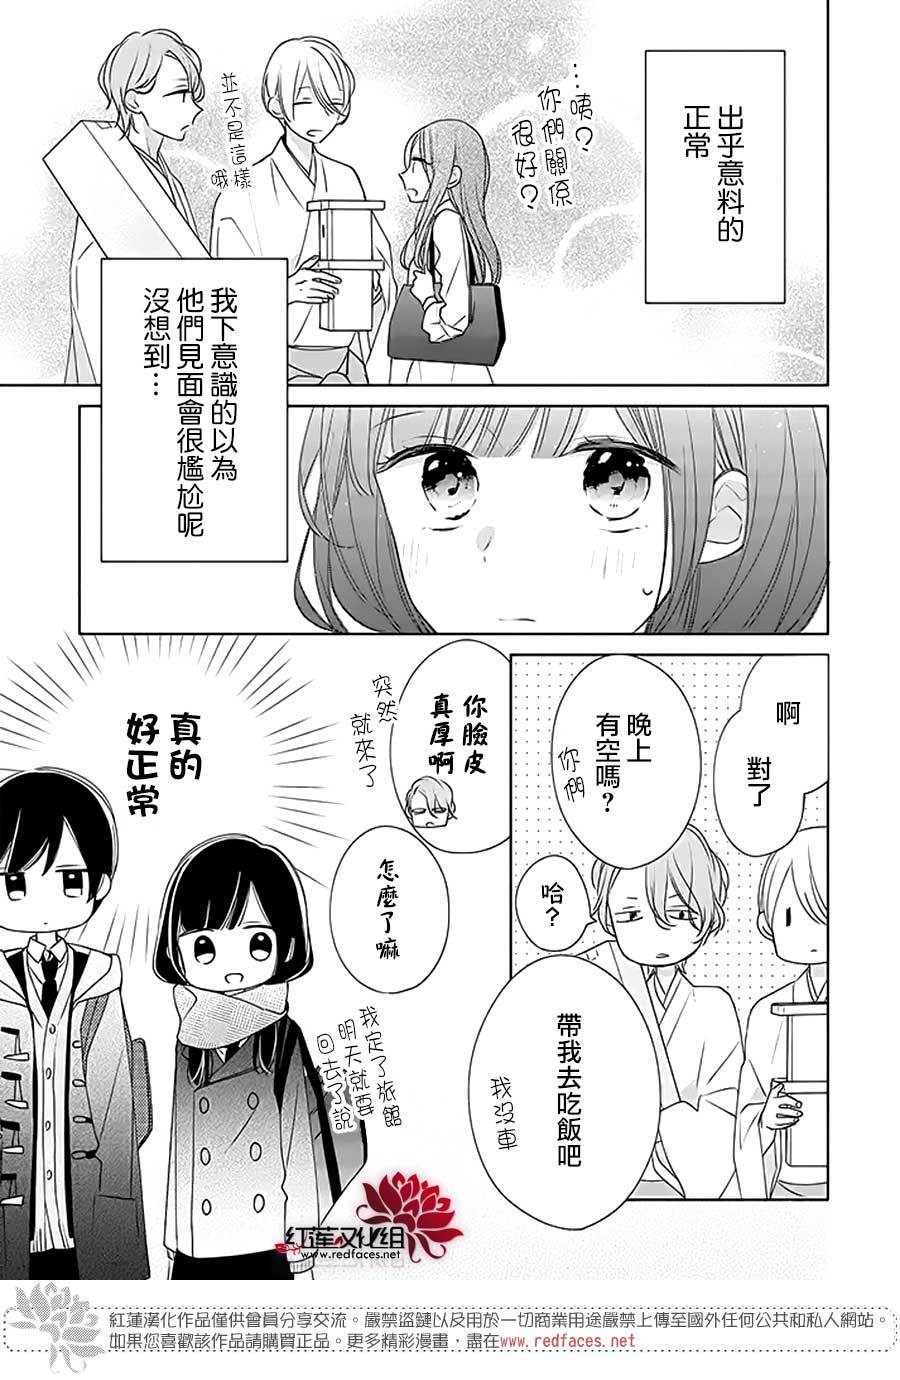 If given a second chance - 26話 - 5